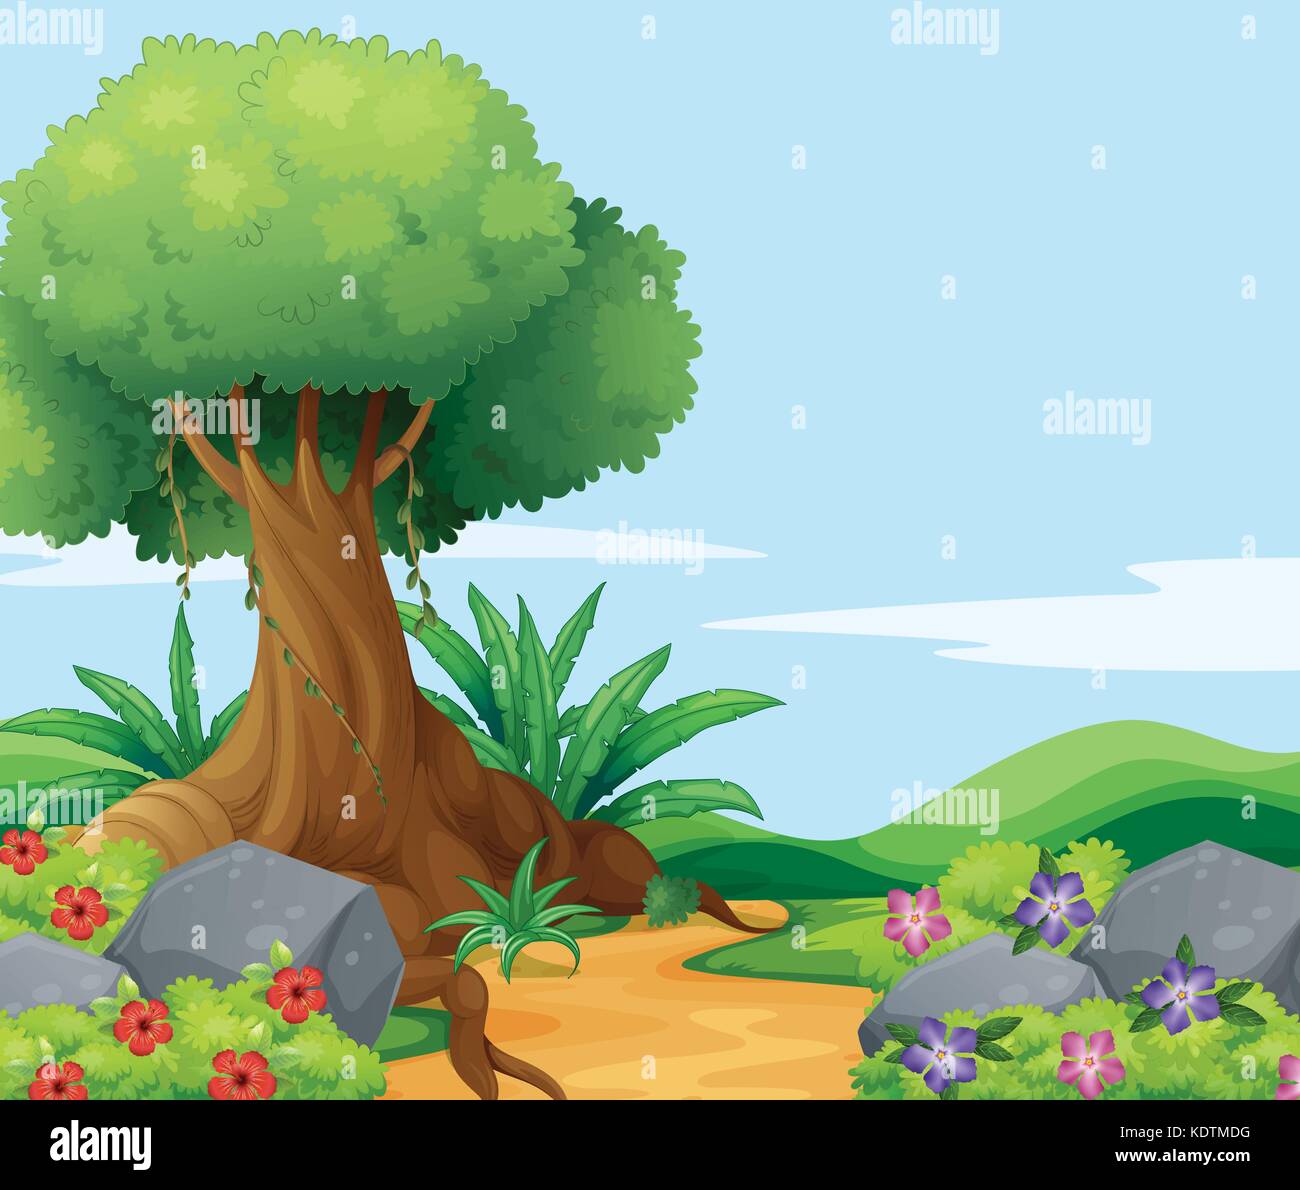 Nature scene with big tree along the track illustration Stock Vector